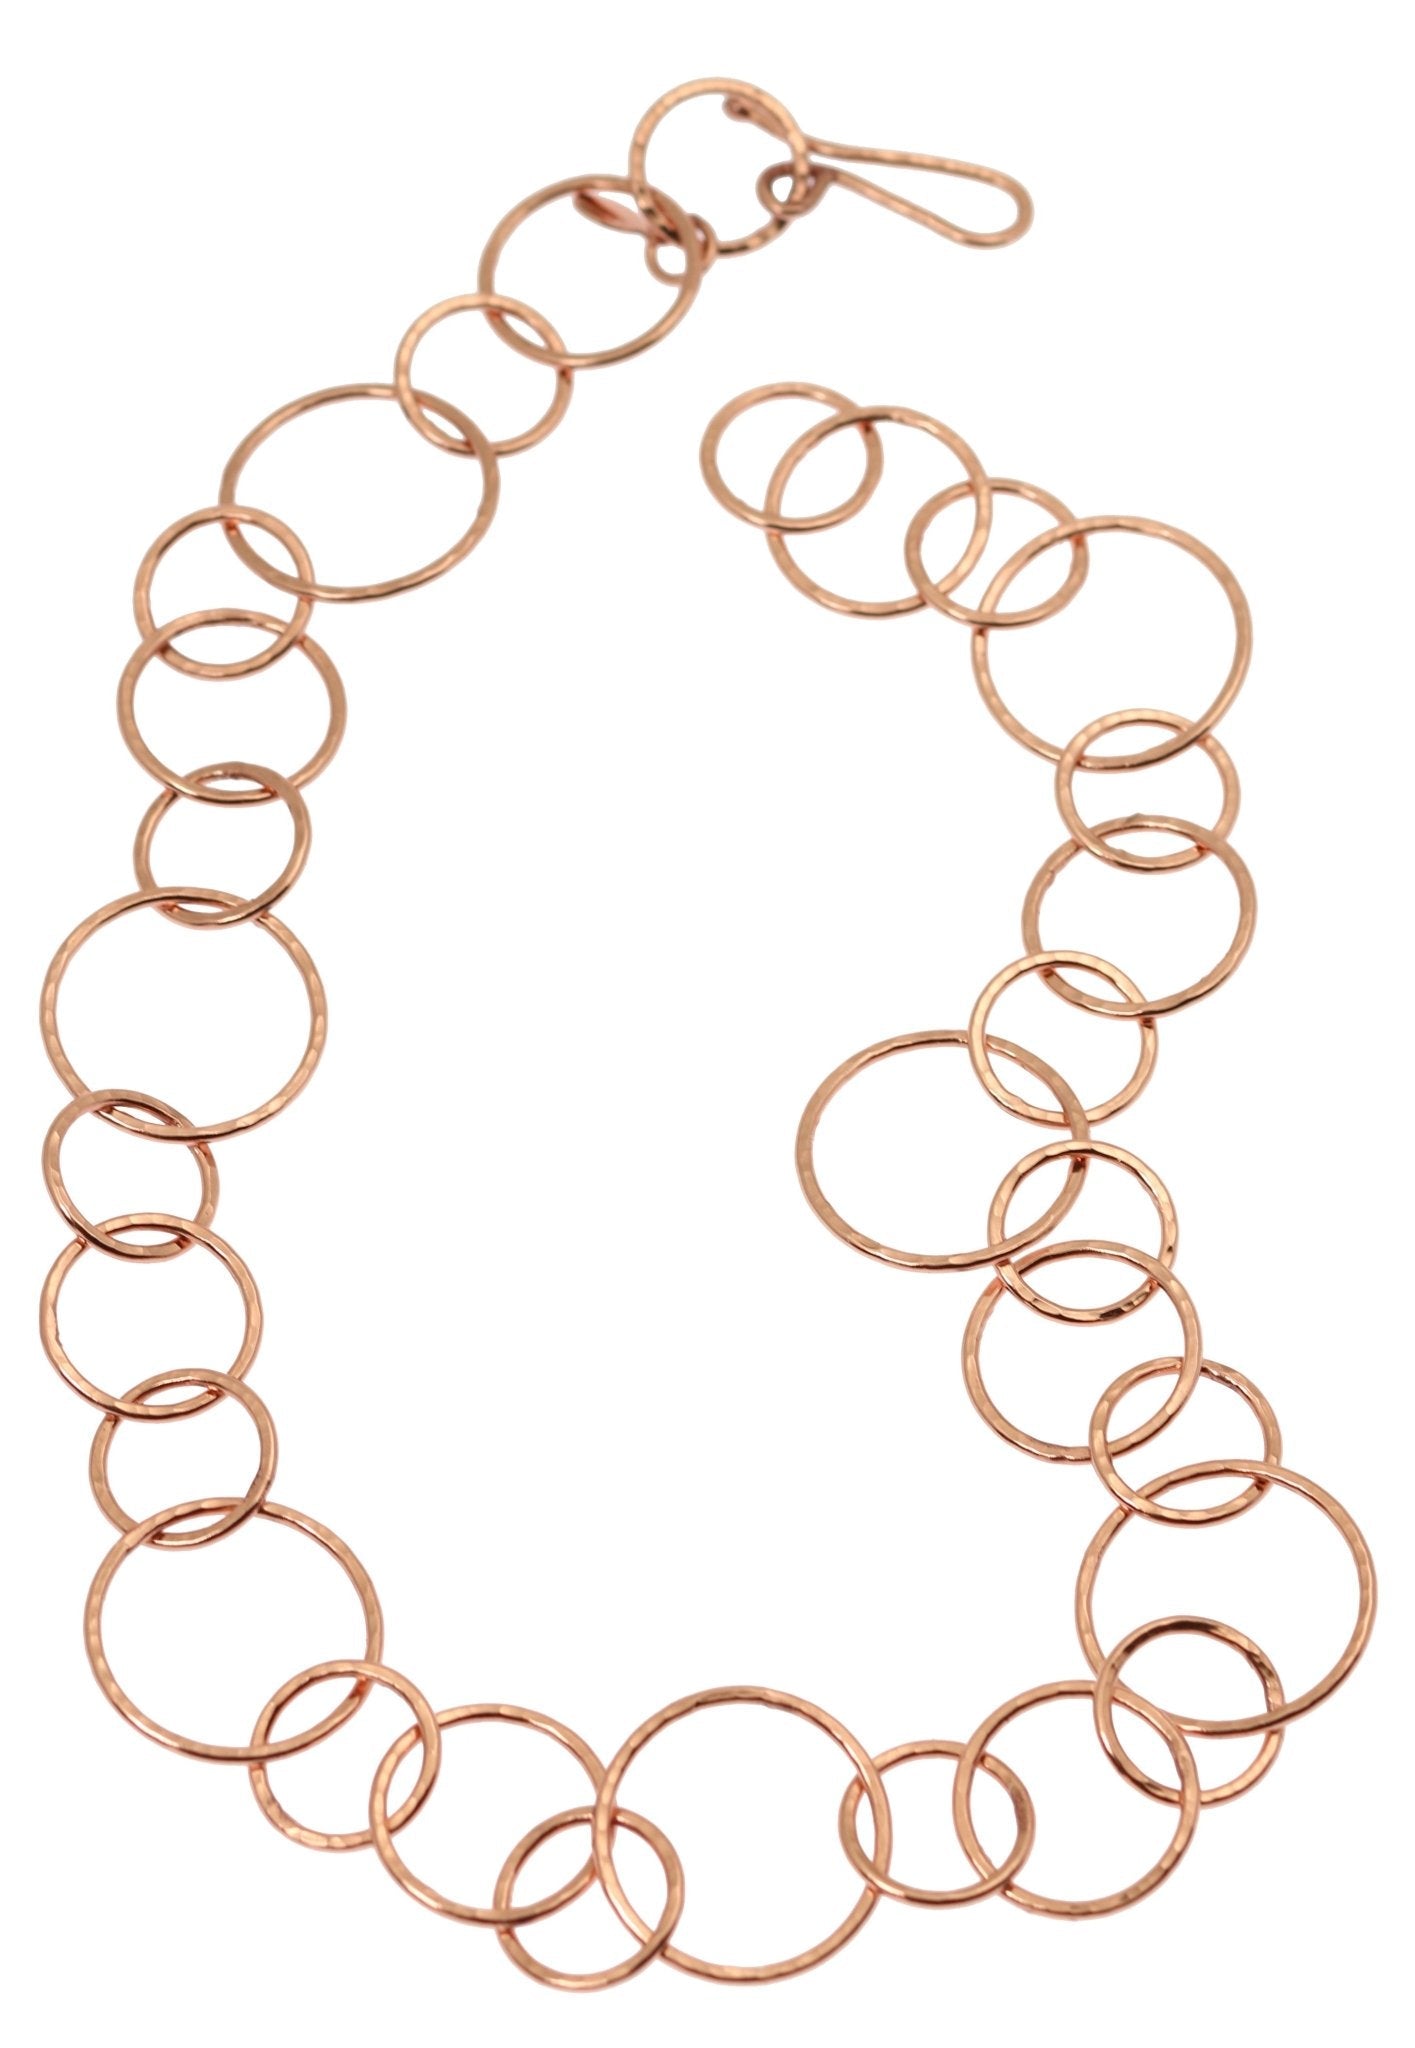 Hammered Copper Chain Link Necklace